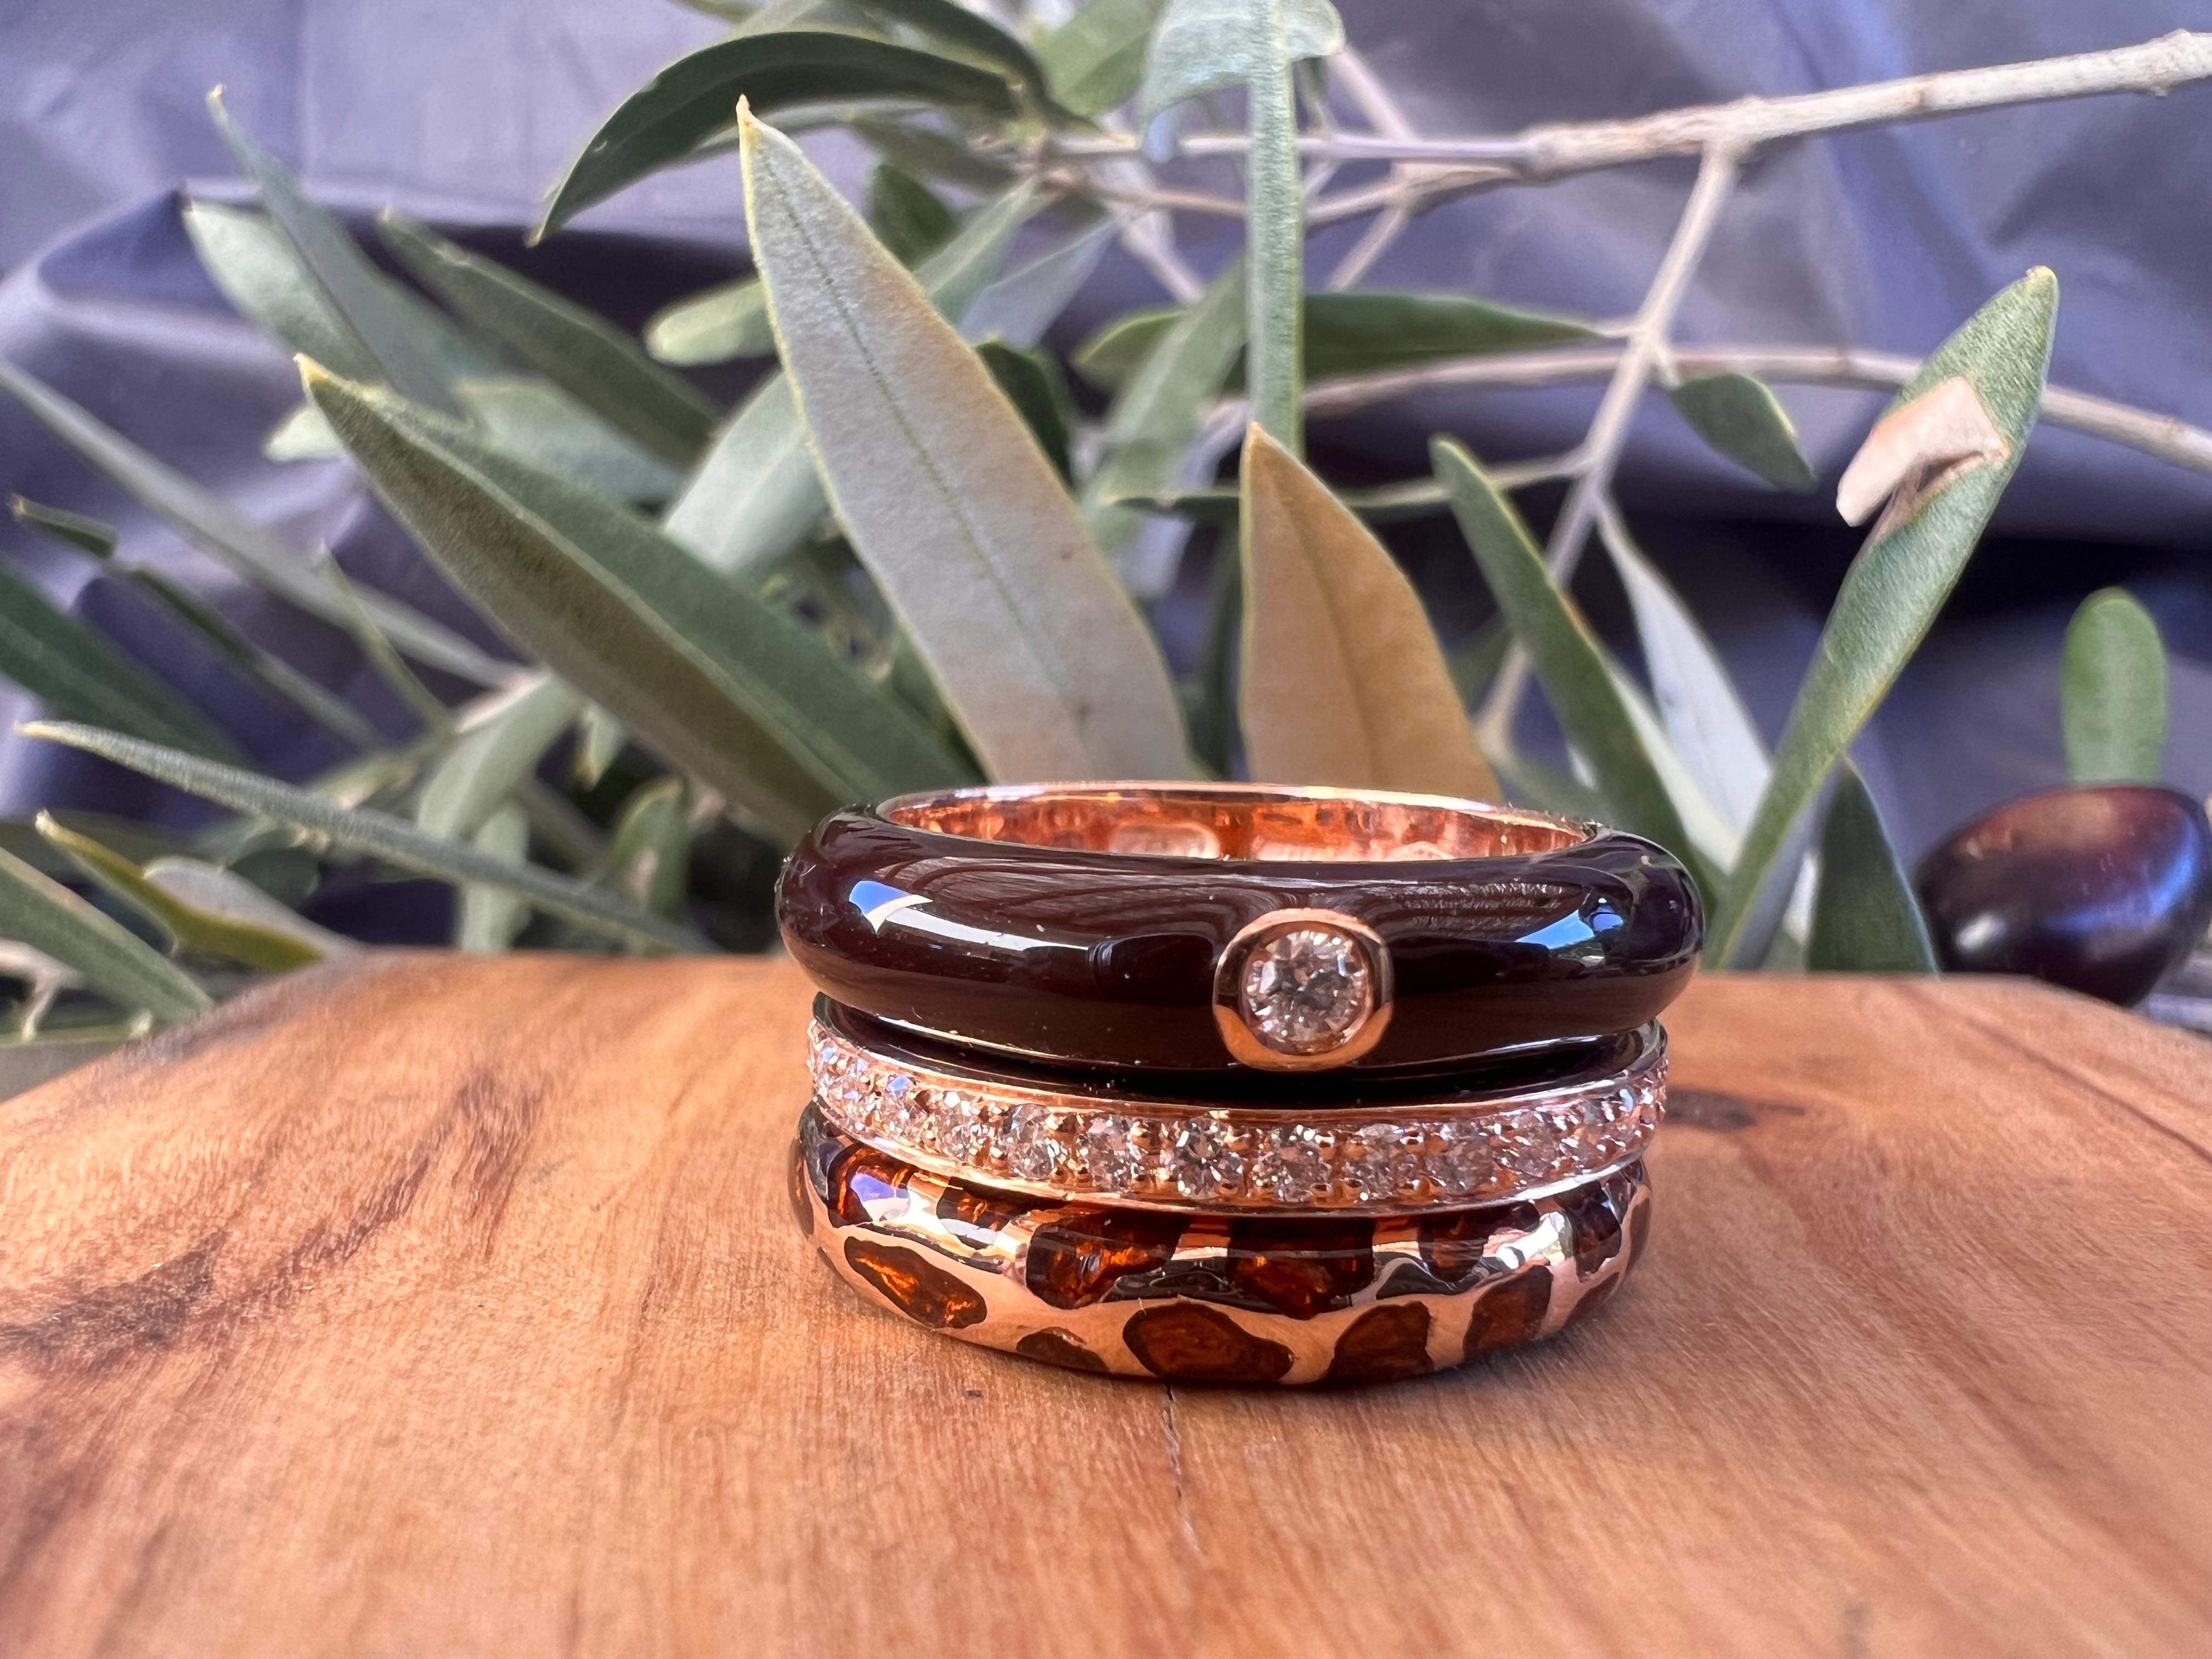 The Set consists of three rose gold rings, each with its own style and personality. The predominant color is brown combined with leopard effect. This is enhanced by the lap-set diamonds on the slimmer ring.
We are a craft workshop, so each piece is